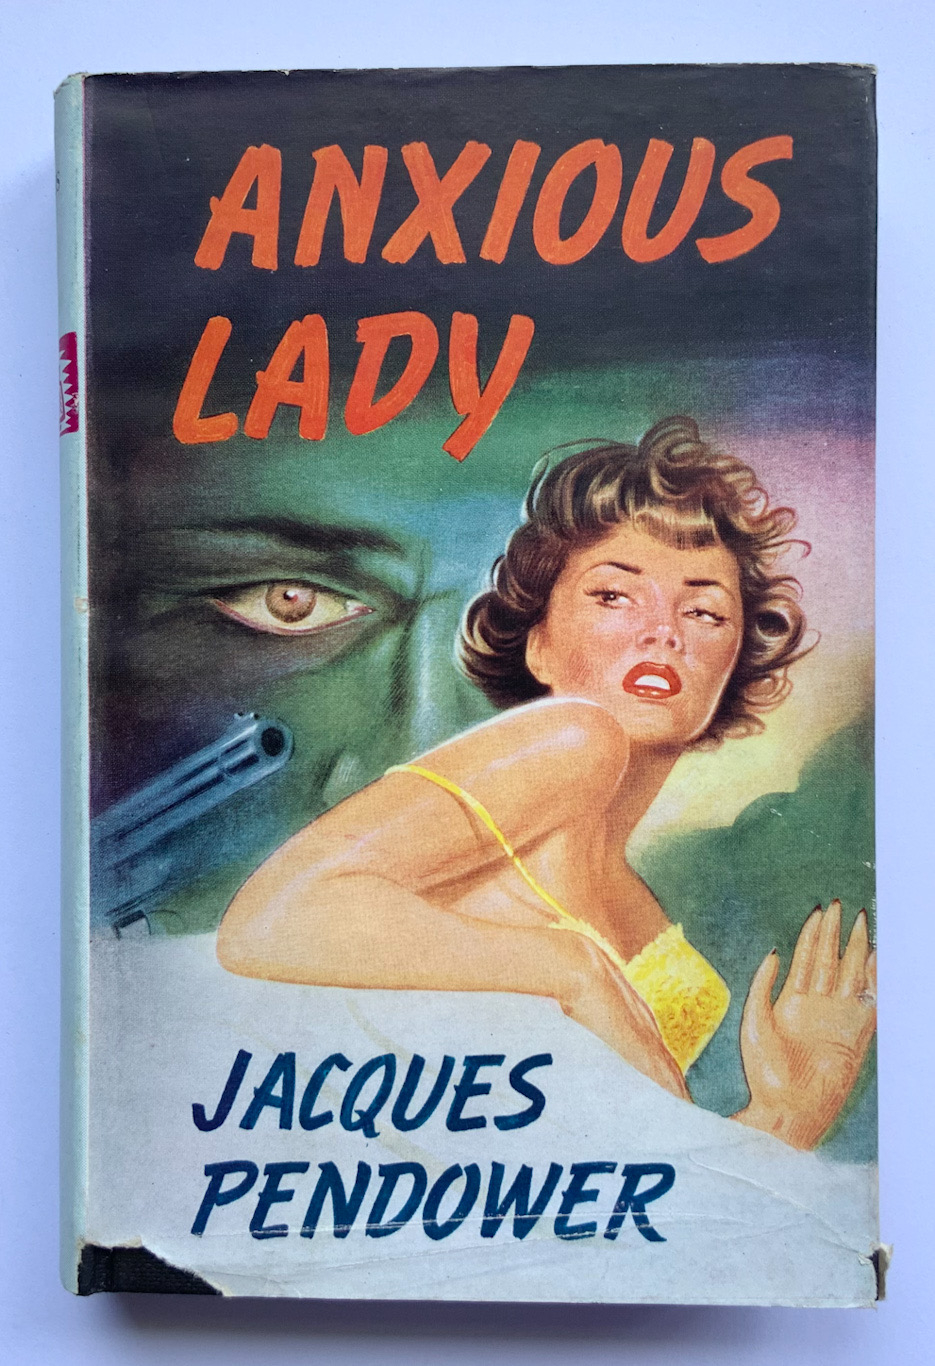 ANXIOUS LADY British crime book by Jacques Pendower 1960 1st edition